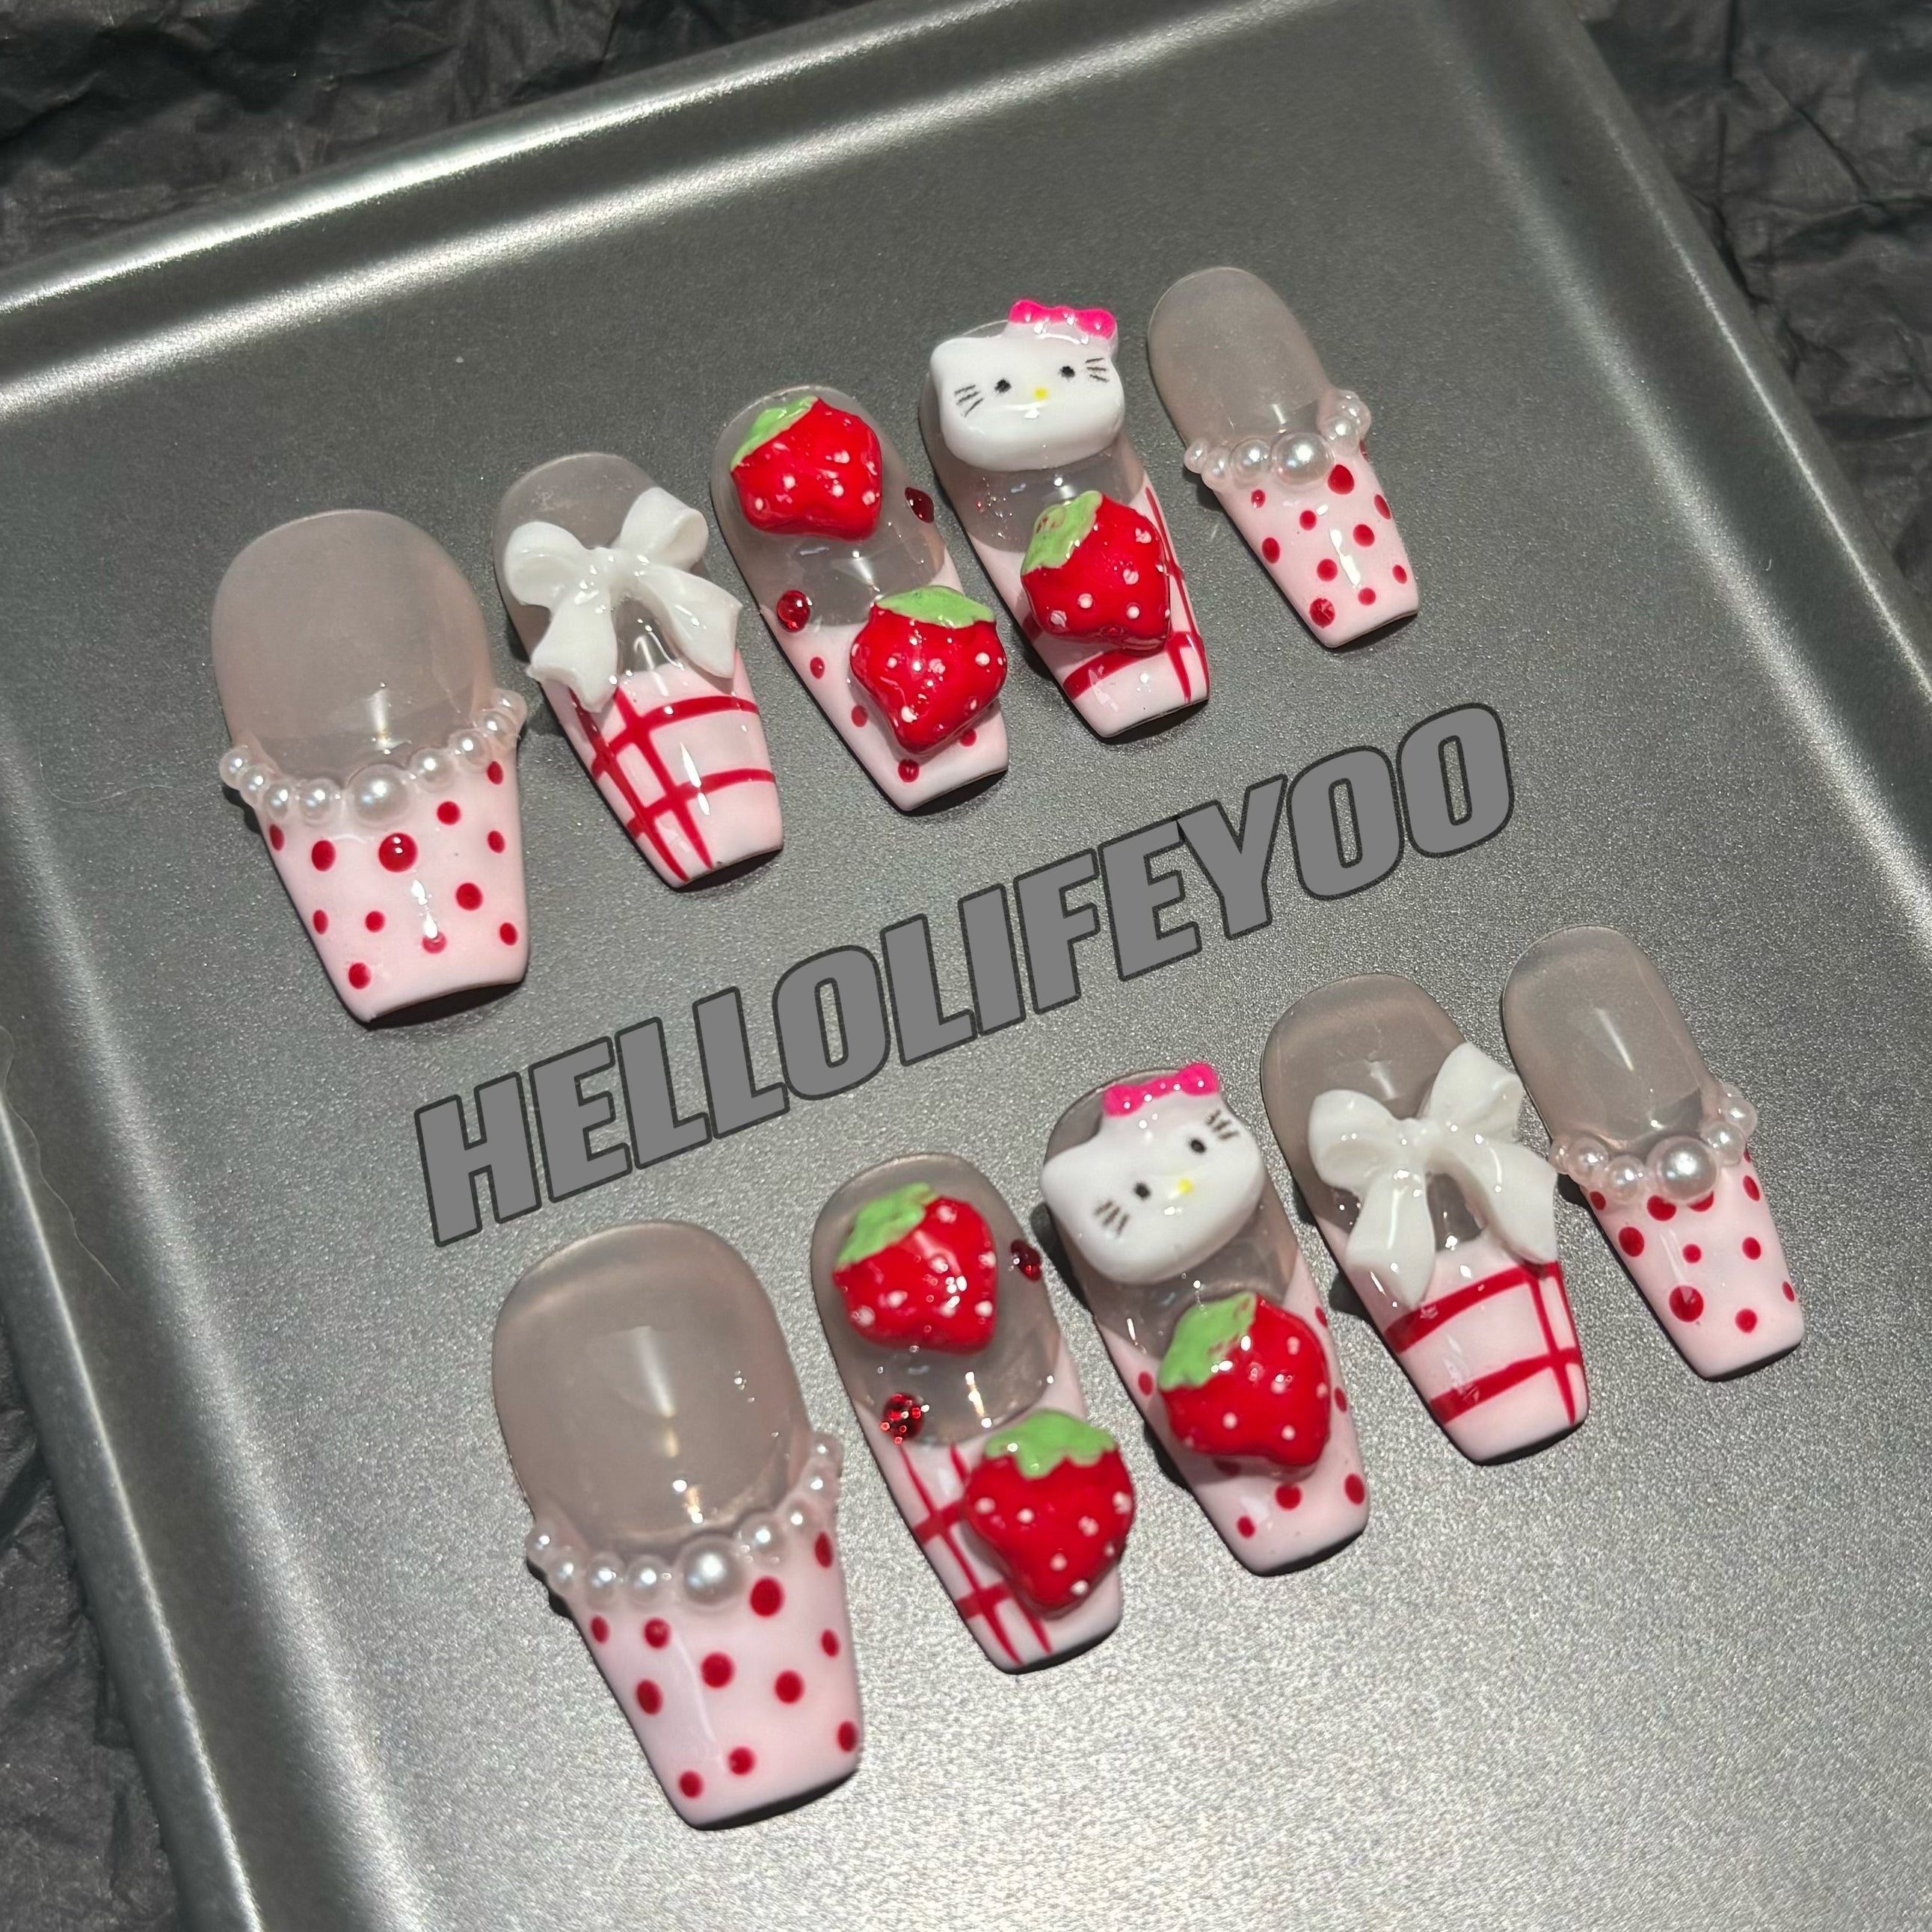 SWEETHEART STRAWBERRY KITTY-TEN PIECES OF HANDCRAFTED PRESS ON NAIL